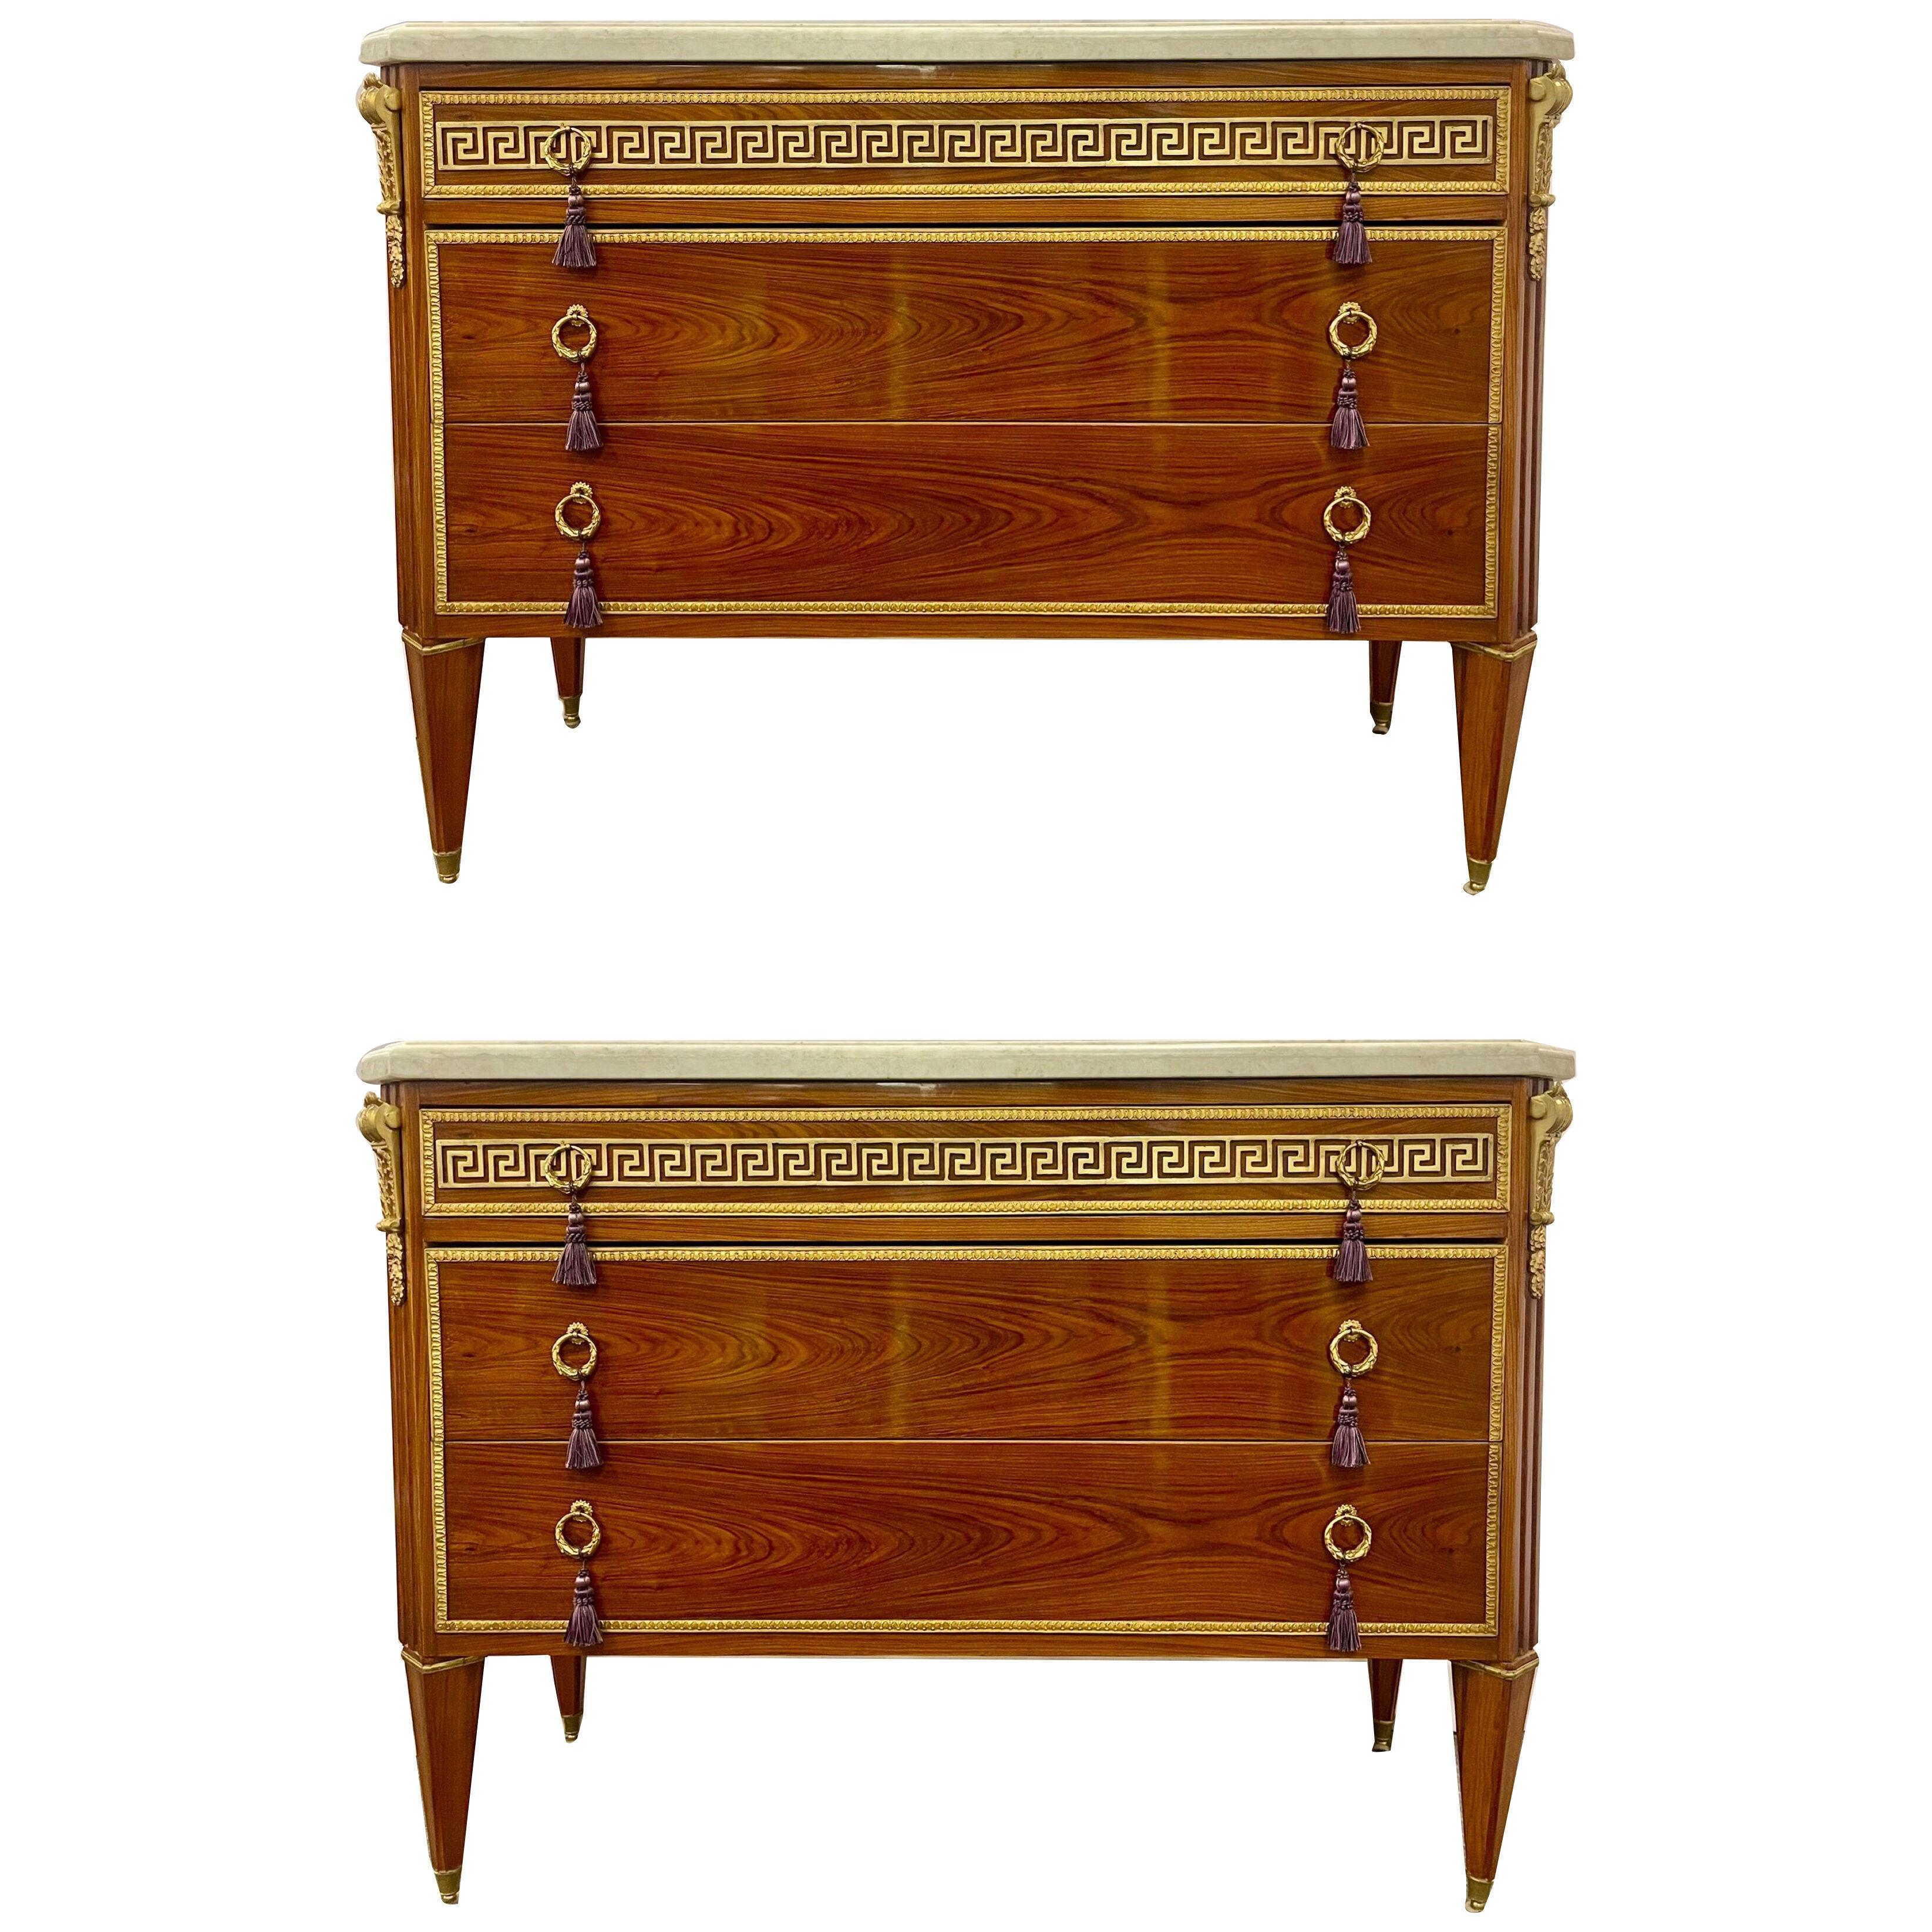 Pair of Tortoise Louis XVI Style Commodes, Chests or Nightstands, Greek Key